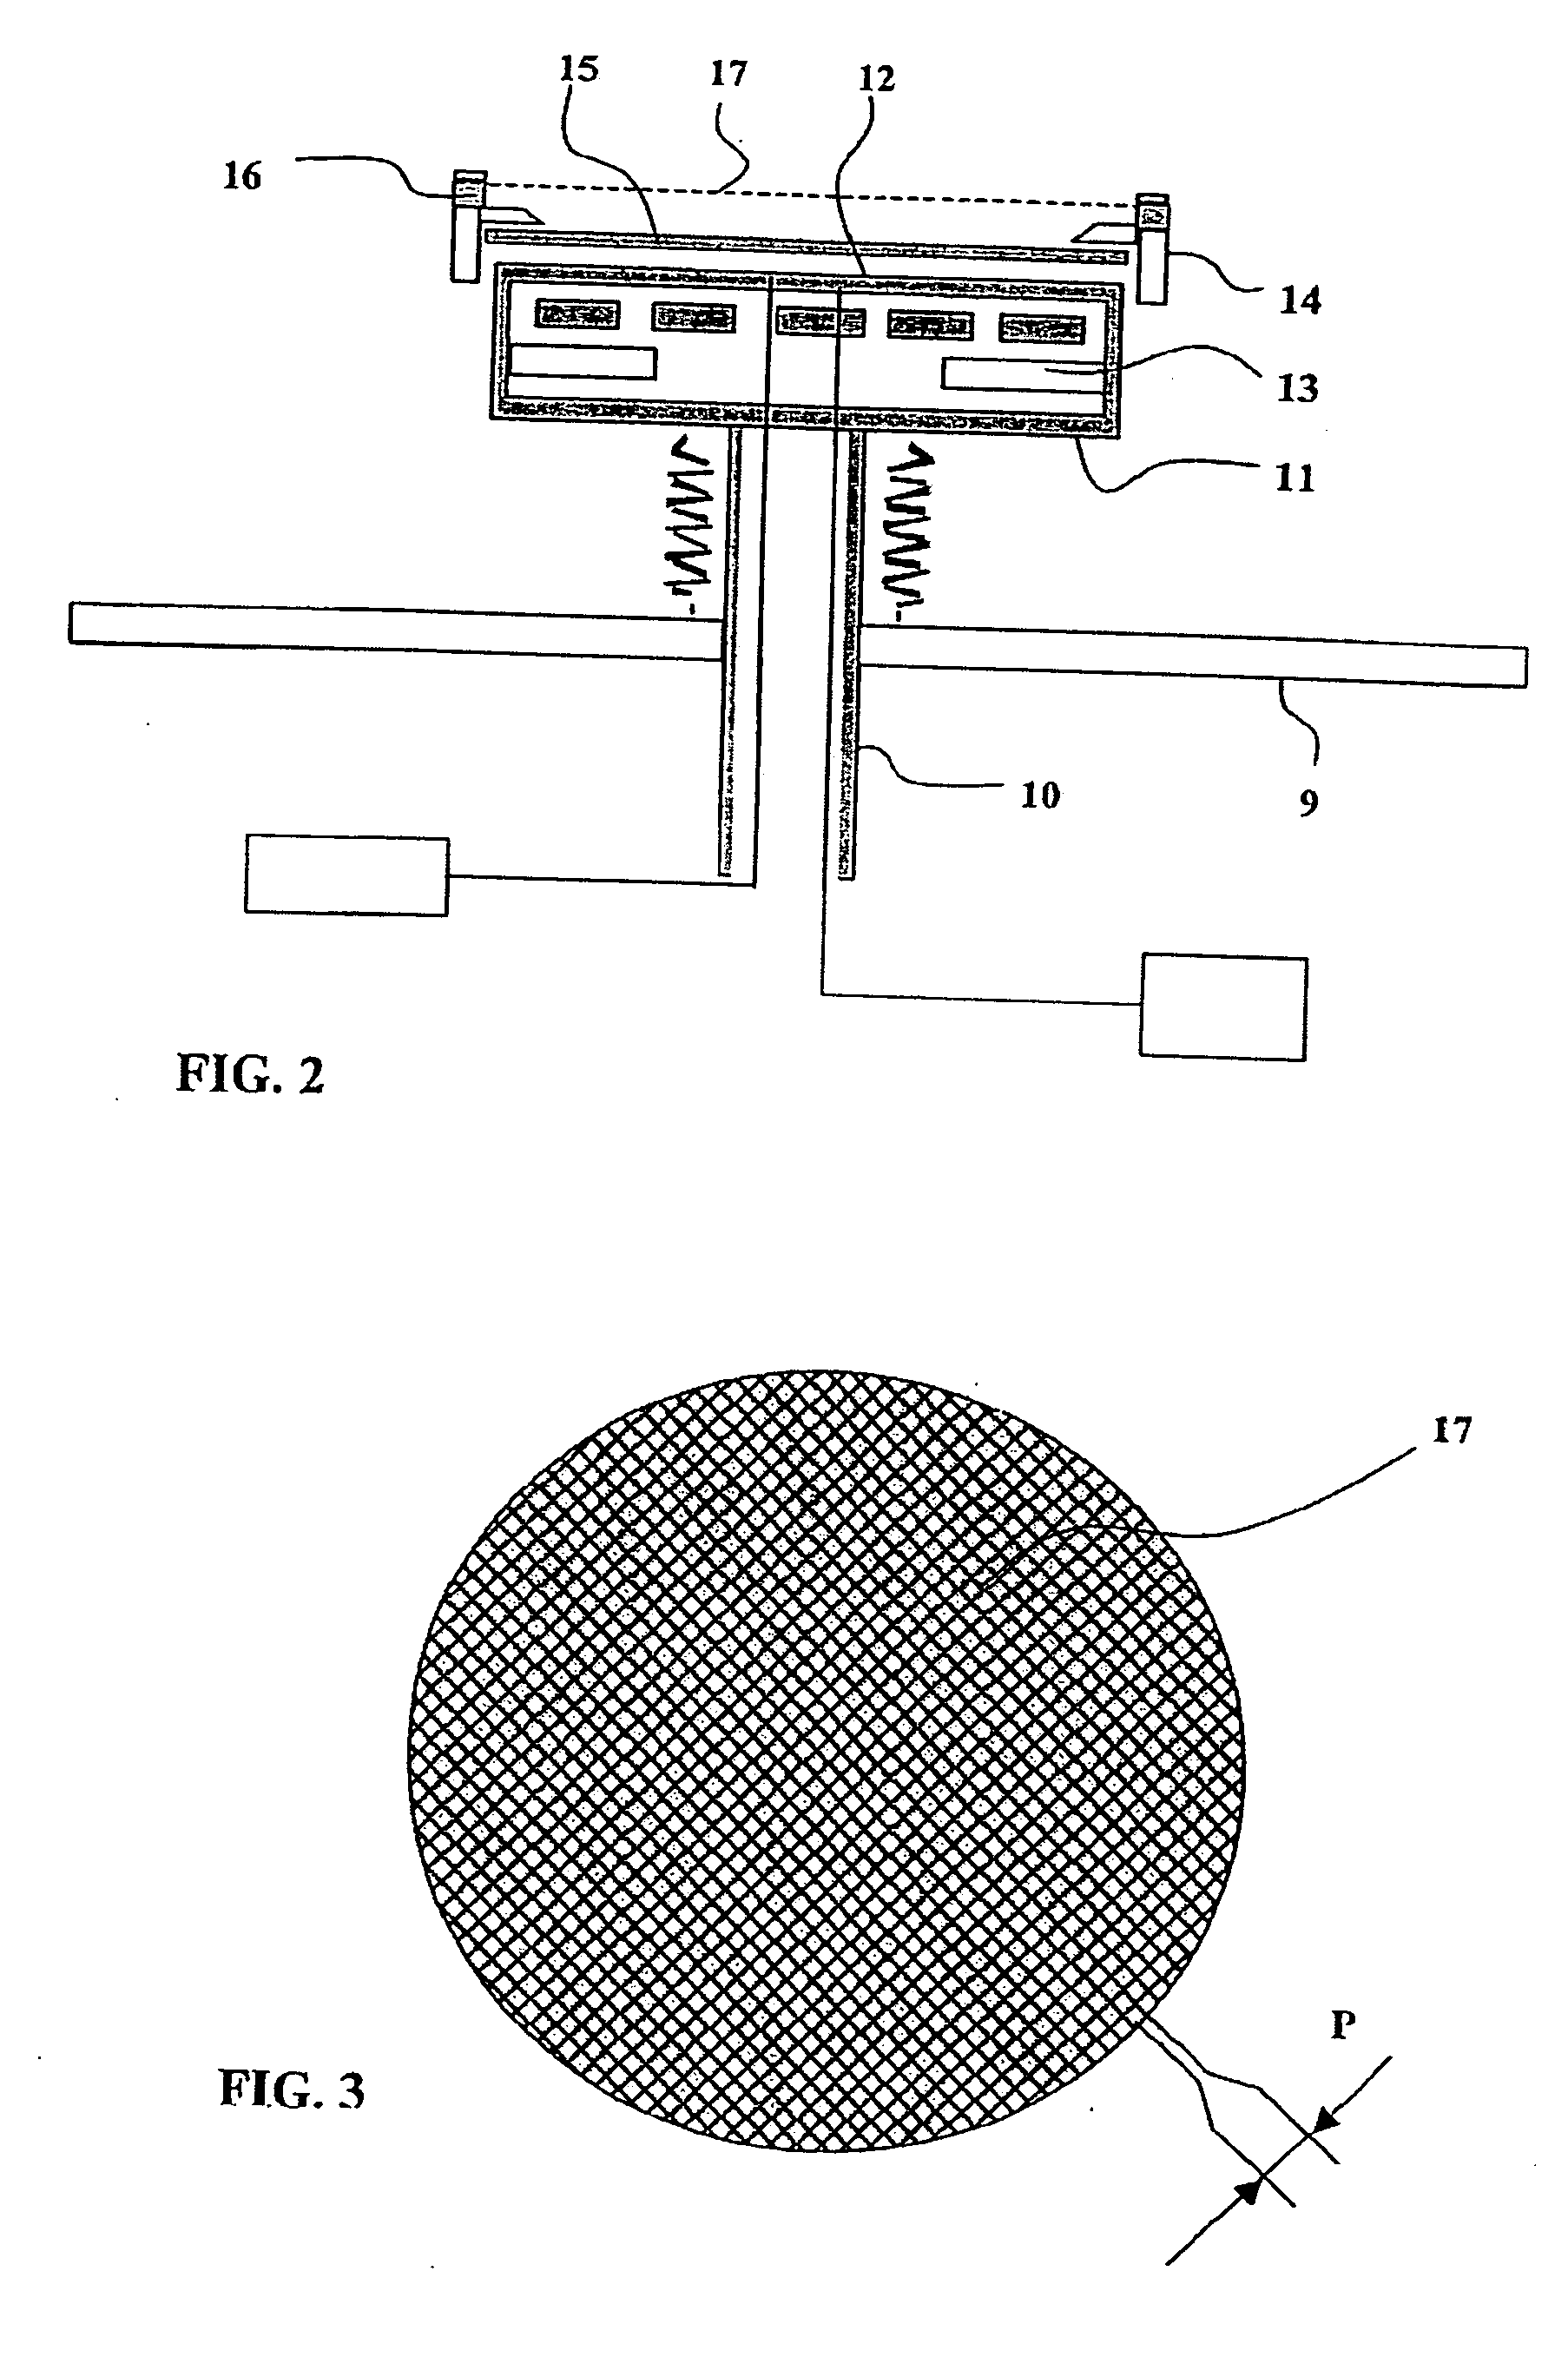 Method and apparatus for non-aggressive plasma-enhanced vapor deposition of dielectric films